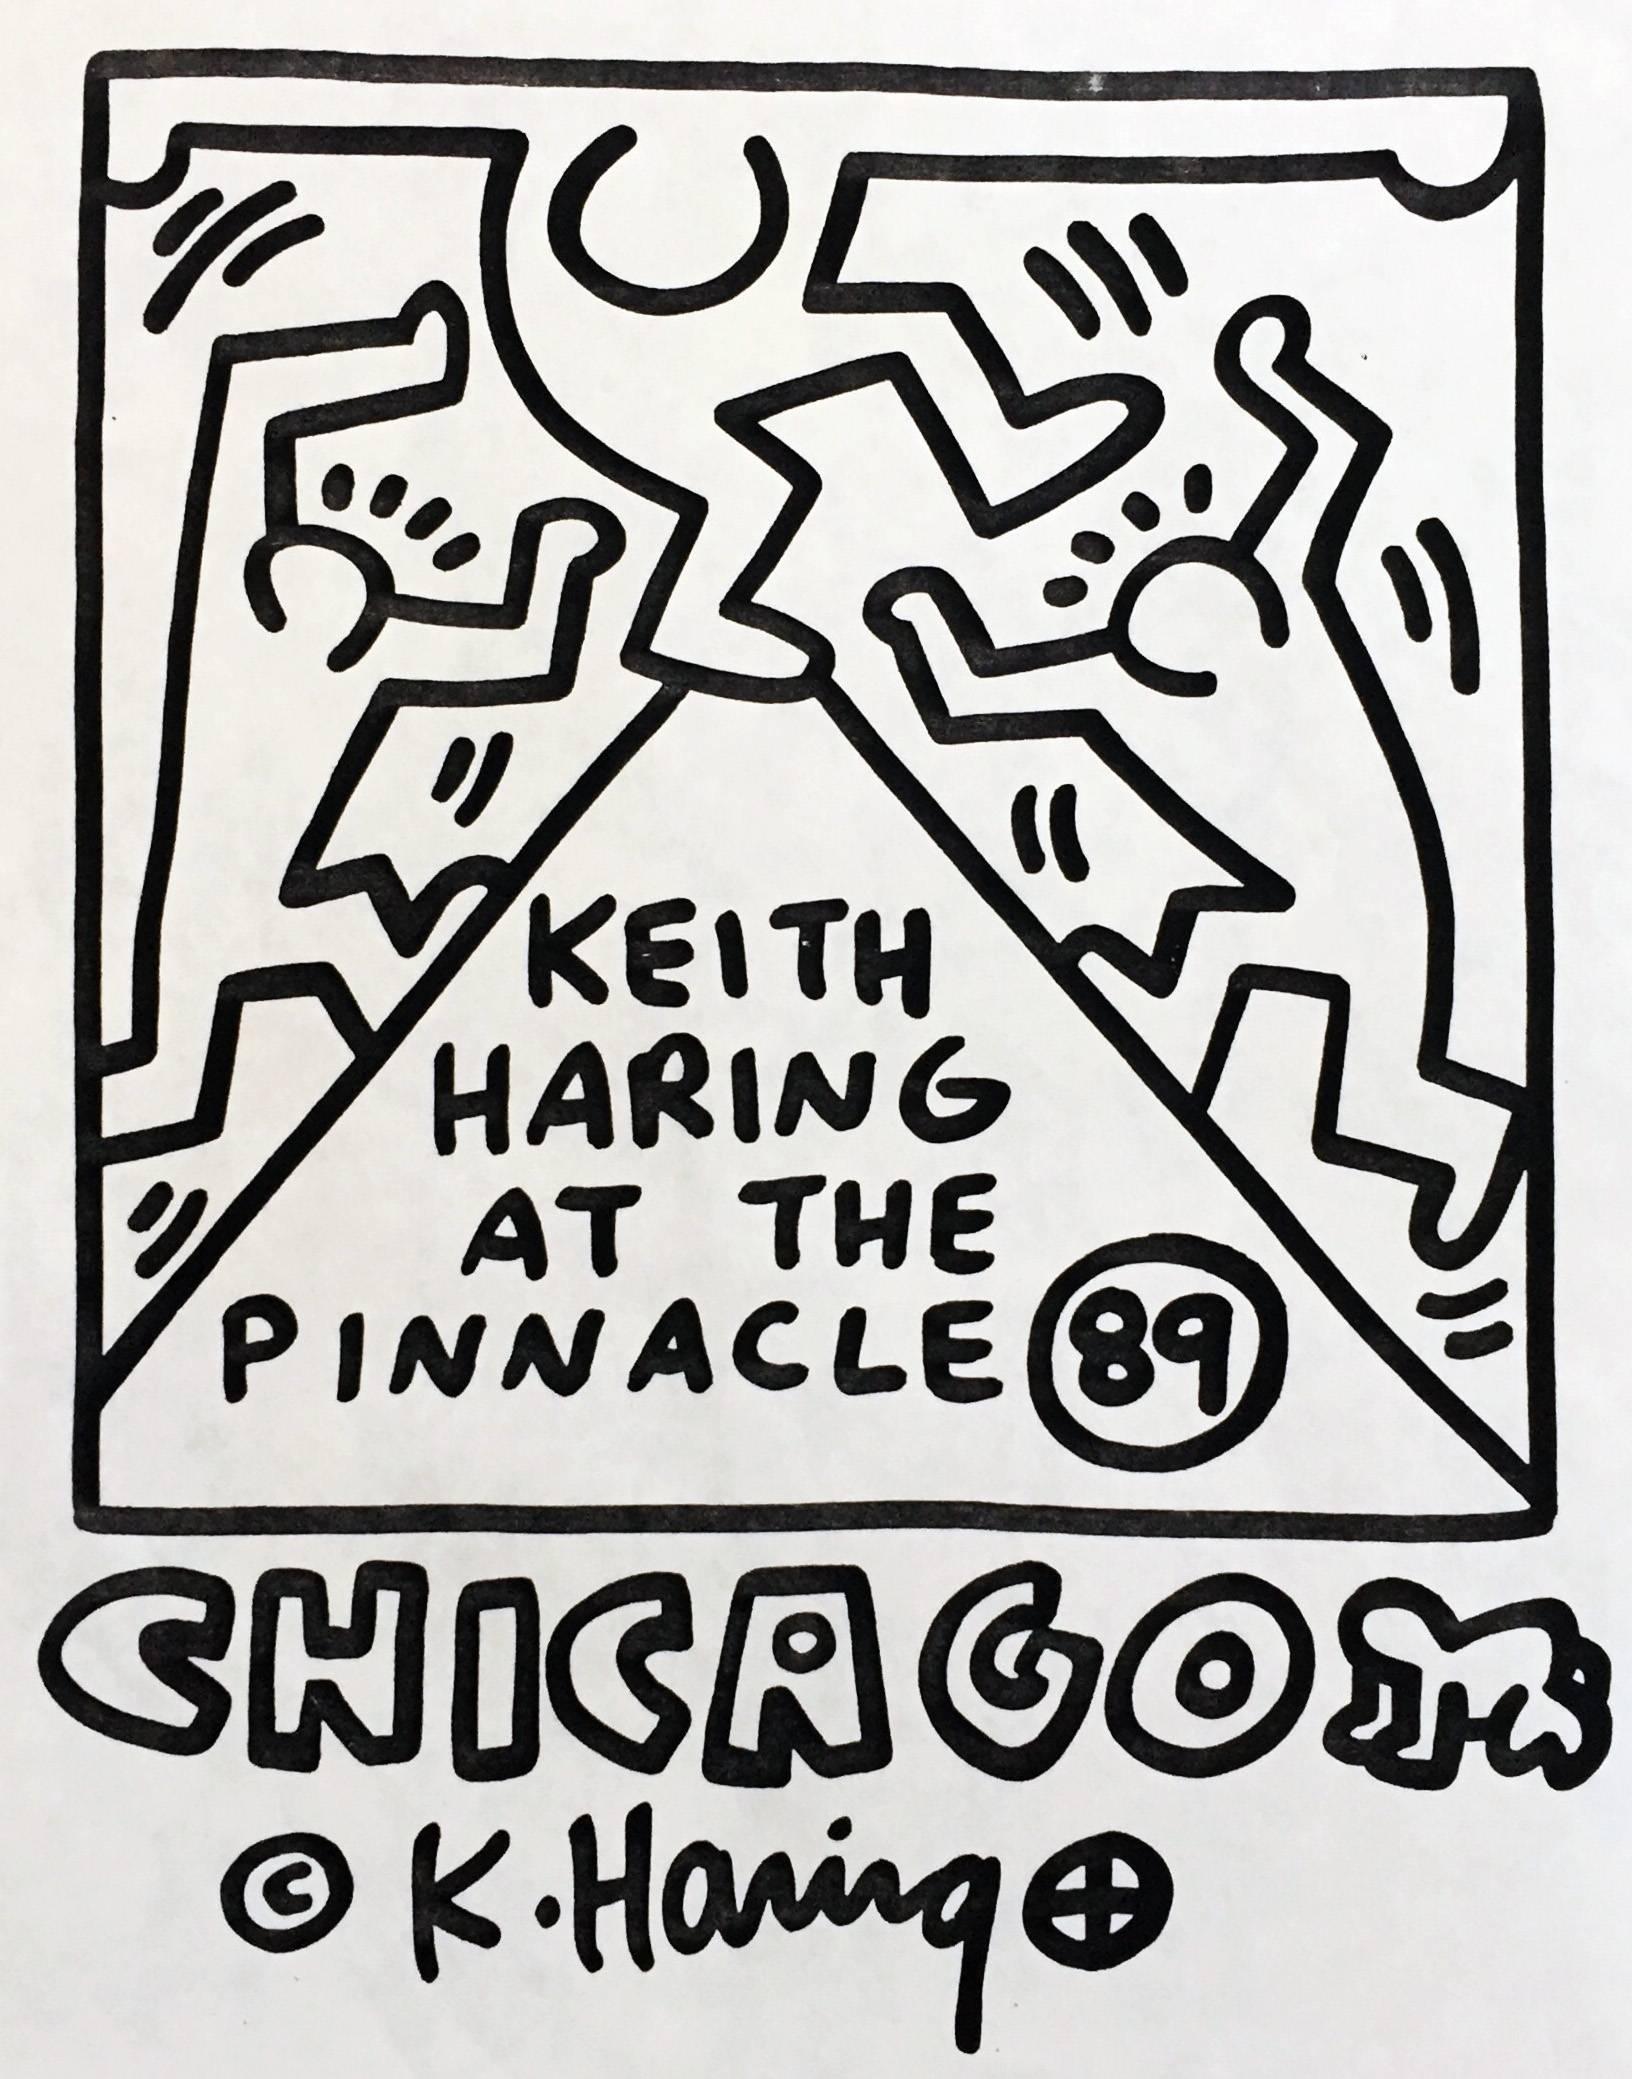 Keith Haring produced this flyer for a large scale public mural project in conjunction with the Chicago Public School system in 1989. An extremely rare Haring collectible that would look superb framed. 

Off-set print. 1989. 
8.5 x 11 inches. 
Minor